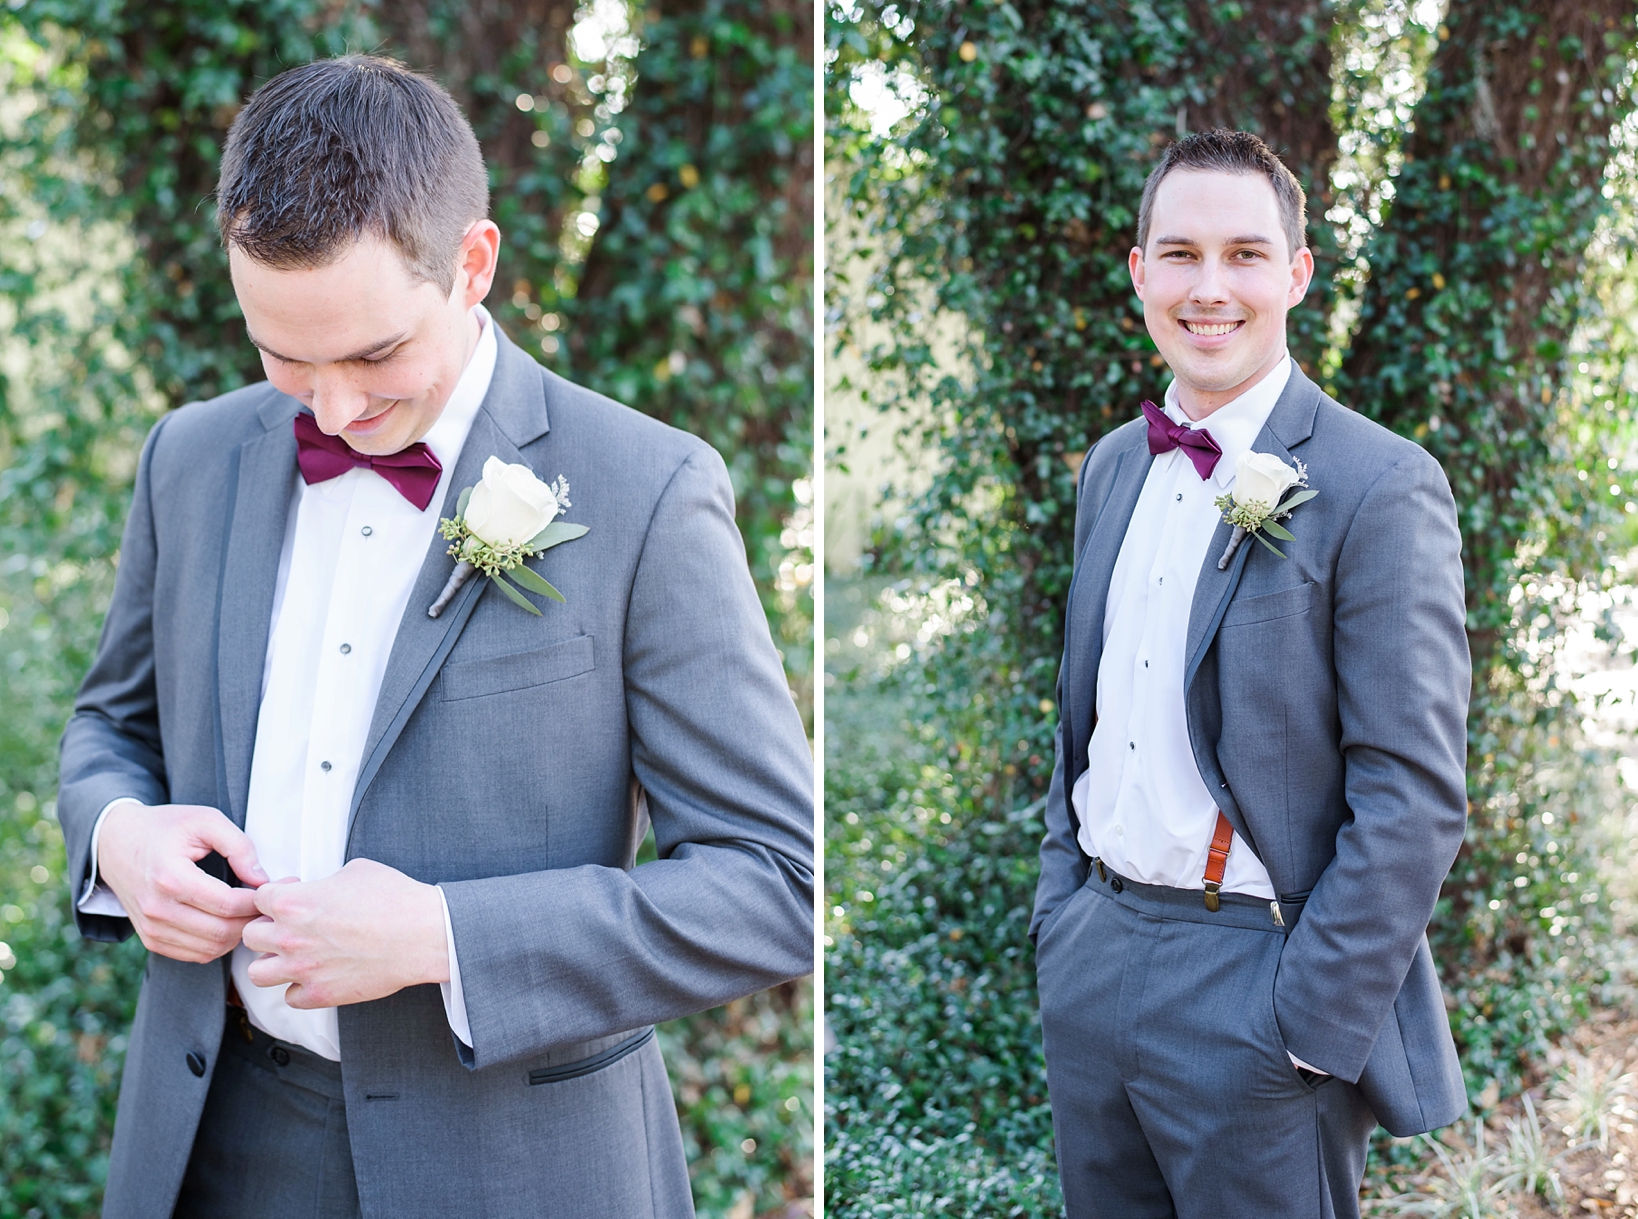 Groom buttoning his jacket and a timeless portrait among the greenery of the trees